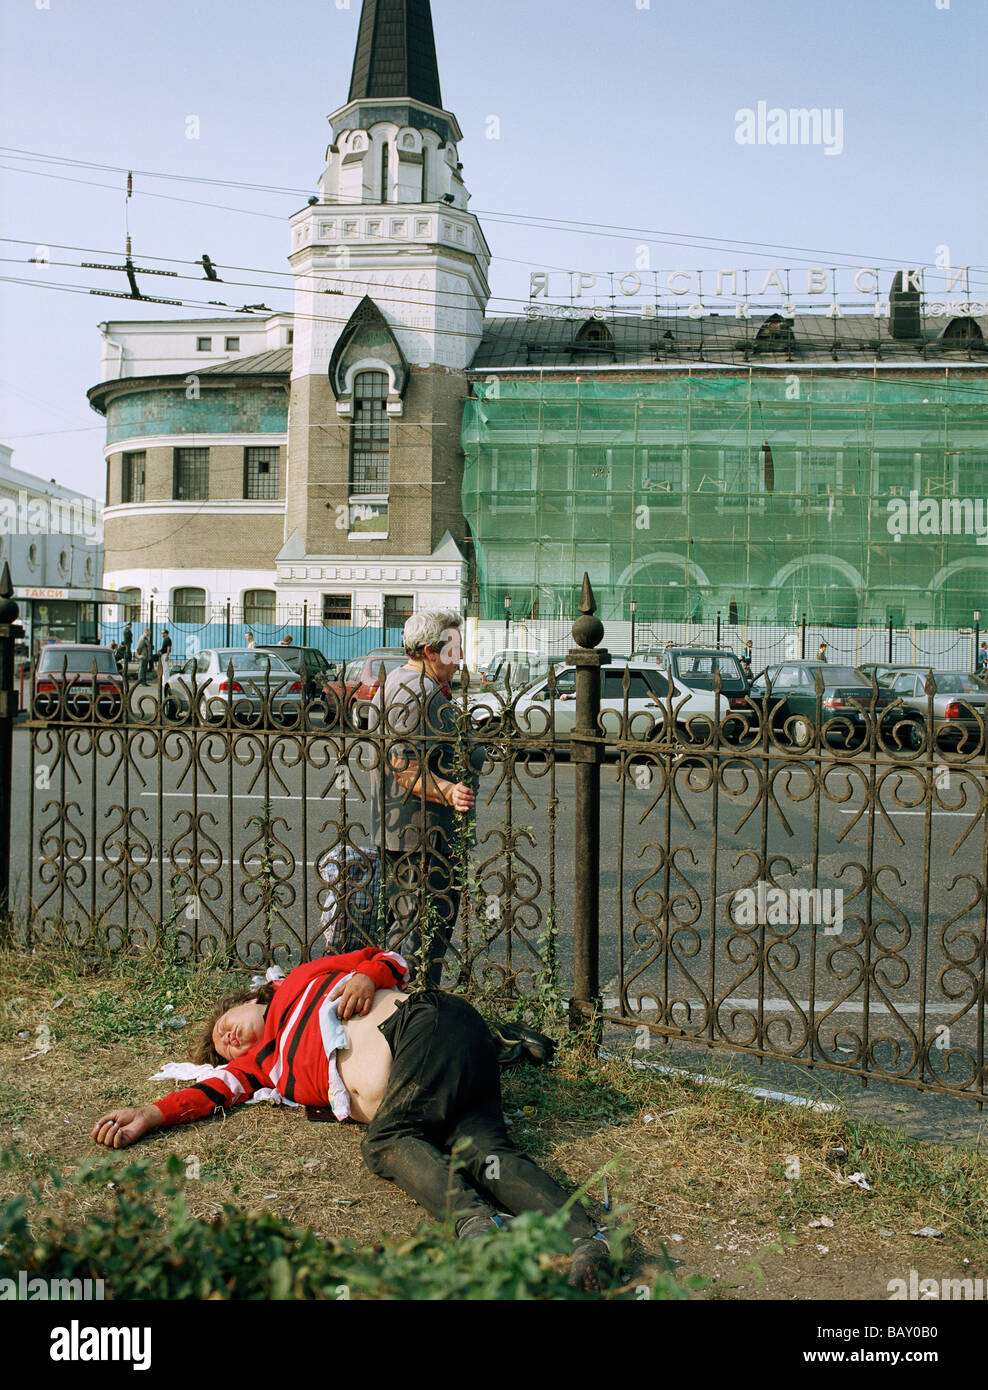 A man lying on the ground, in the background the Yaroslav railway station, Moscow, Russia Stock Photo